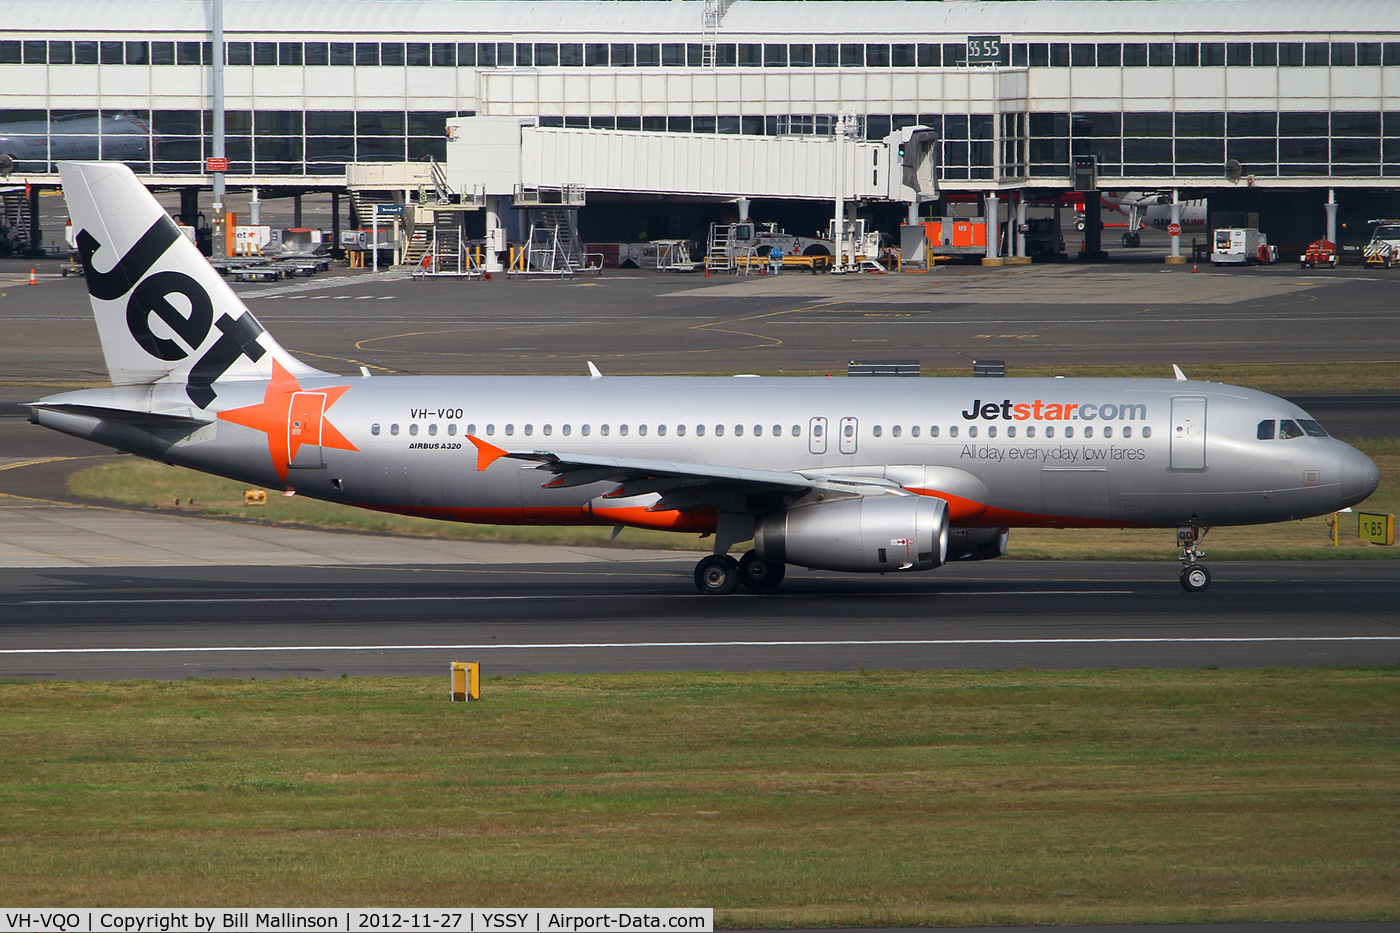 VH-VQO, 2000 Airbus A320-232 C/N 2587, lining up for 16R